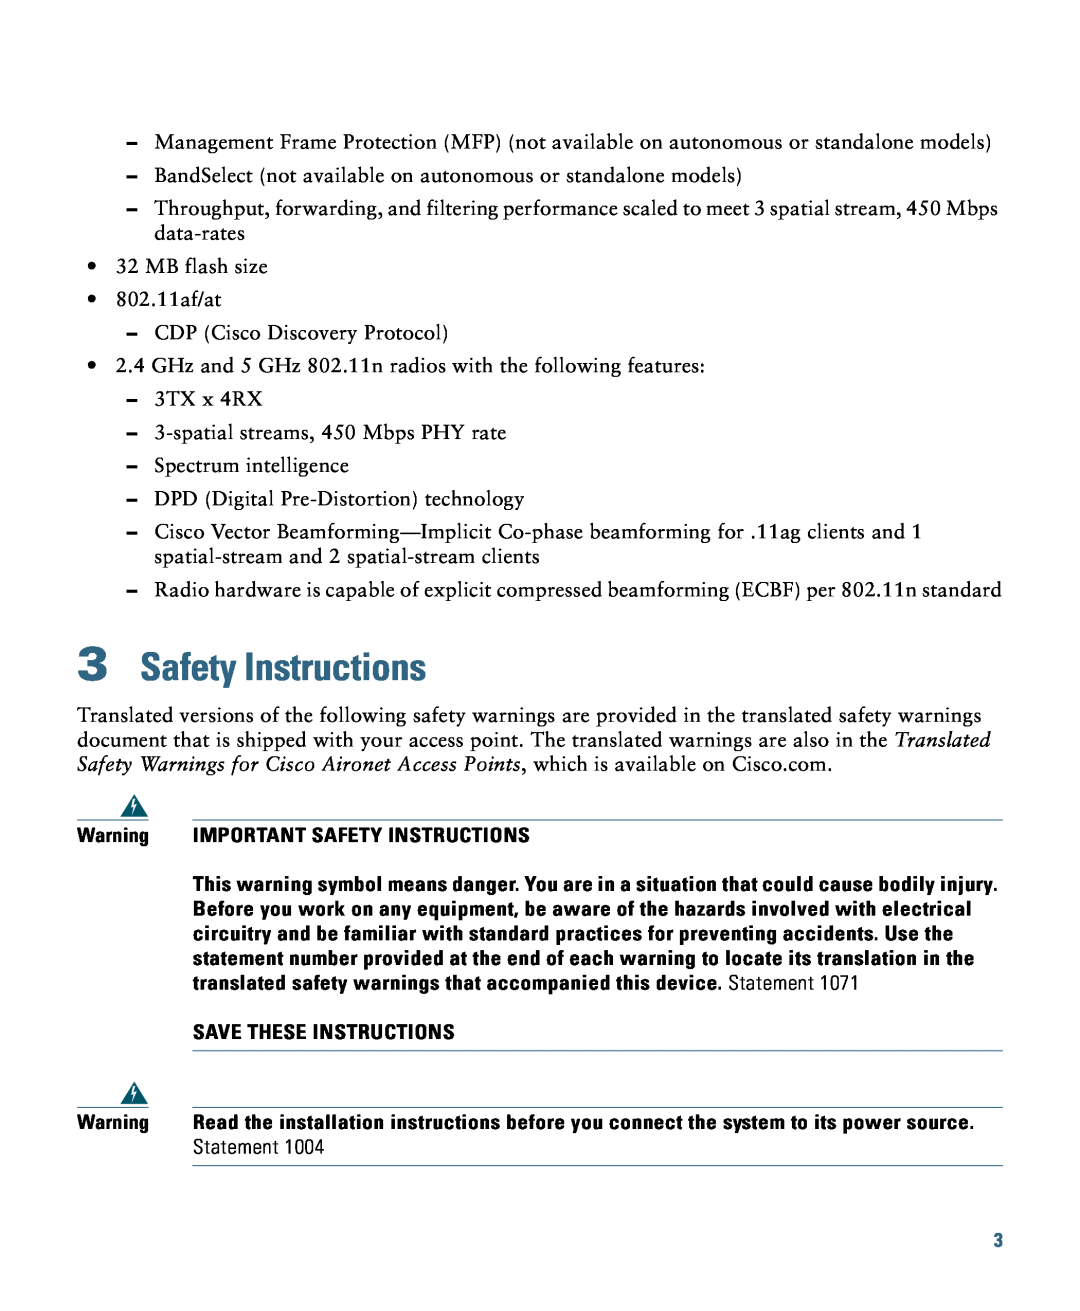 Cisco Systems AIRCAP2602ICK9, 2600, AIRSAP2602IAK9 Important Safety Instructions, Save These Instructions, Statement 